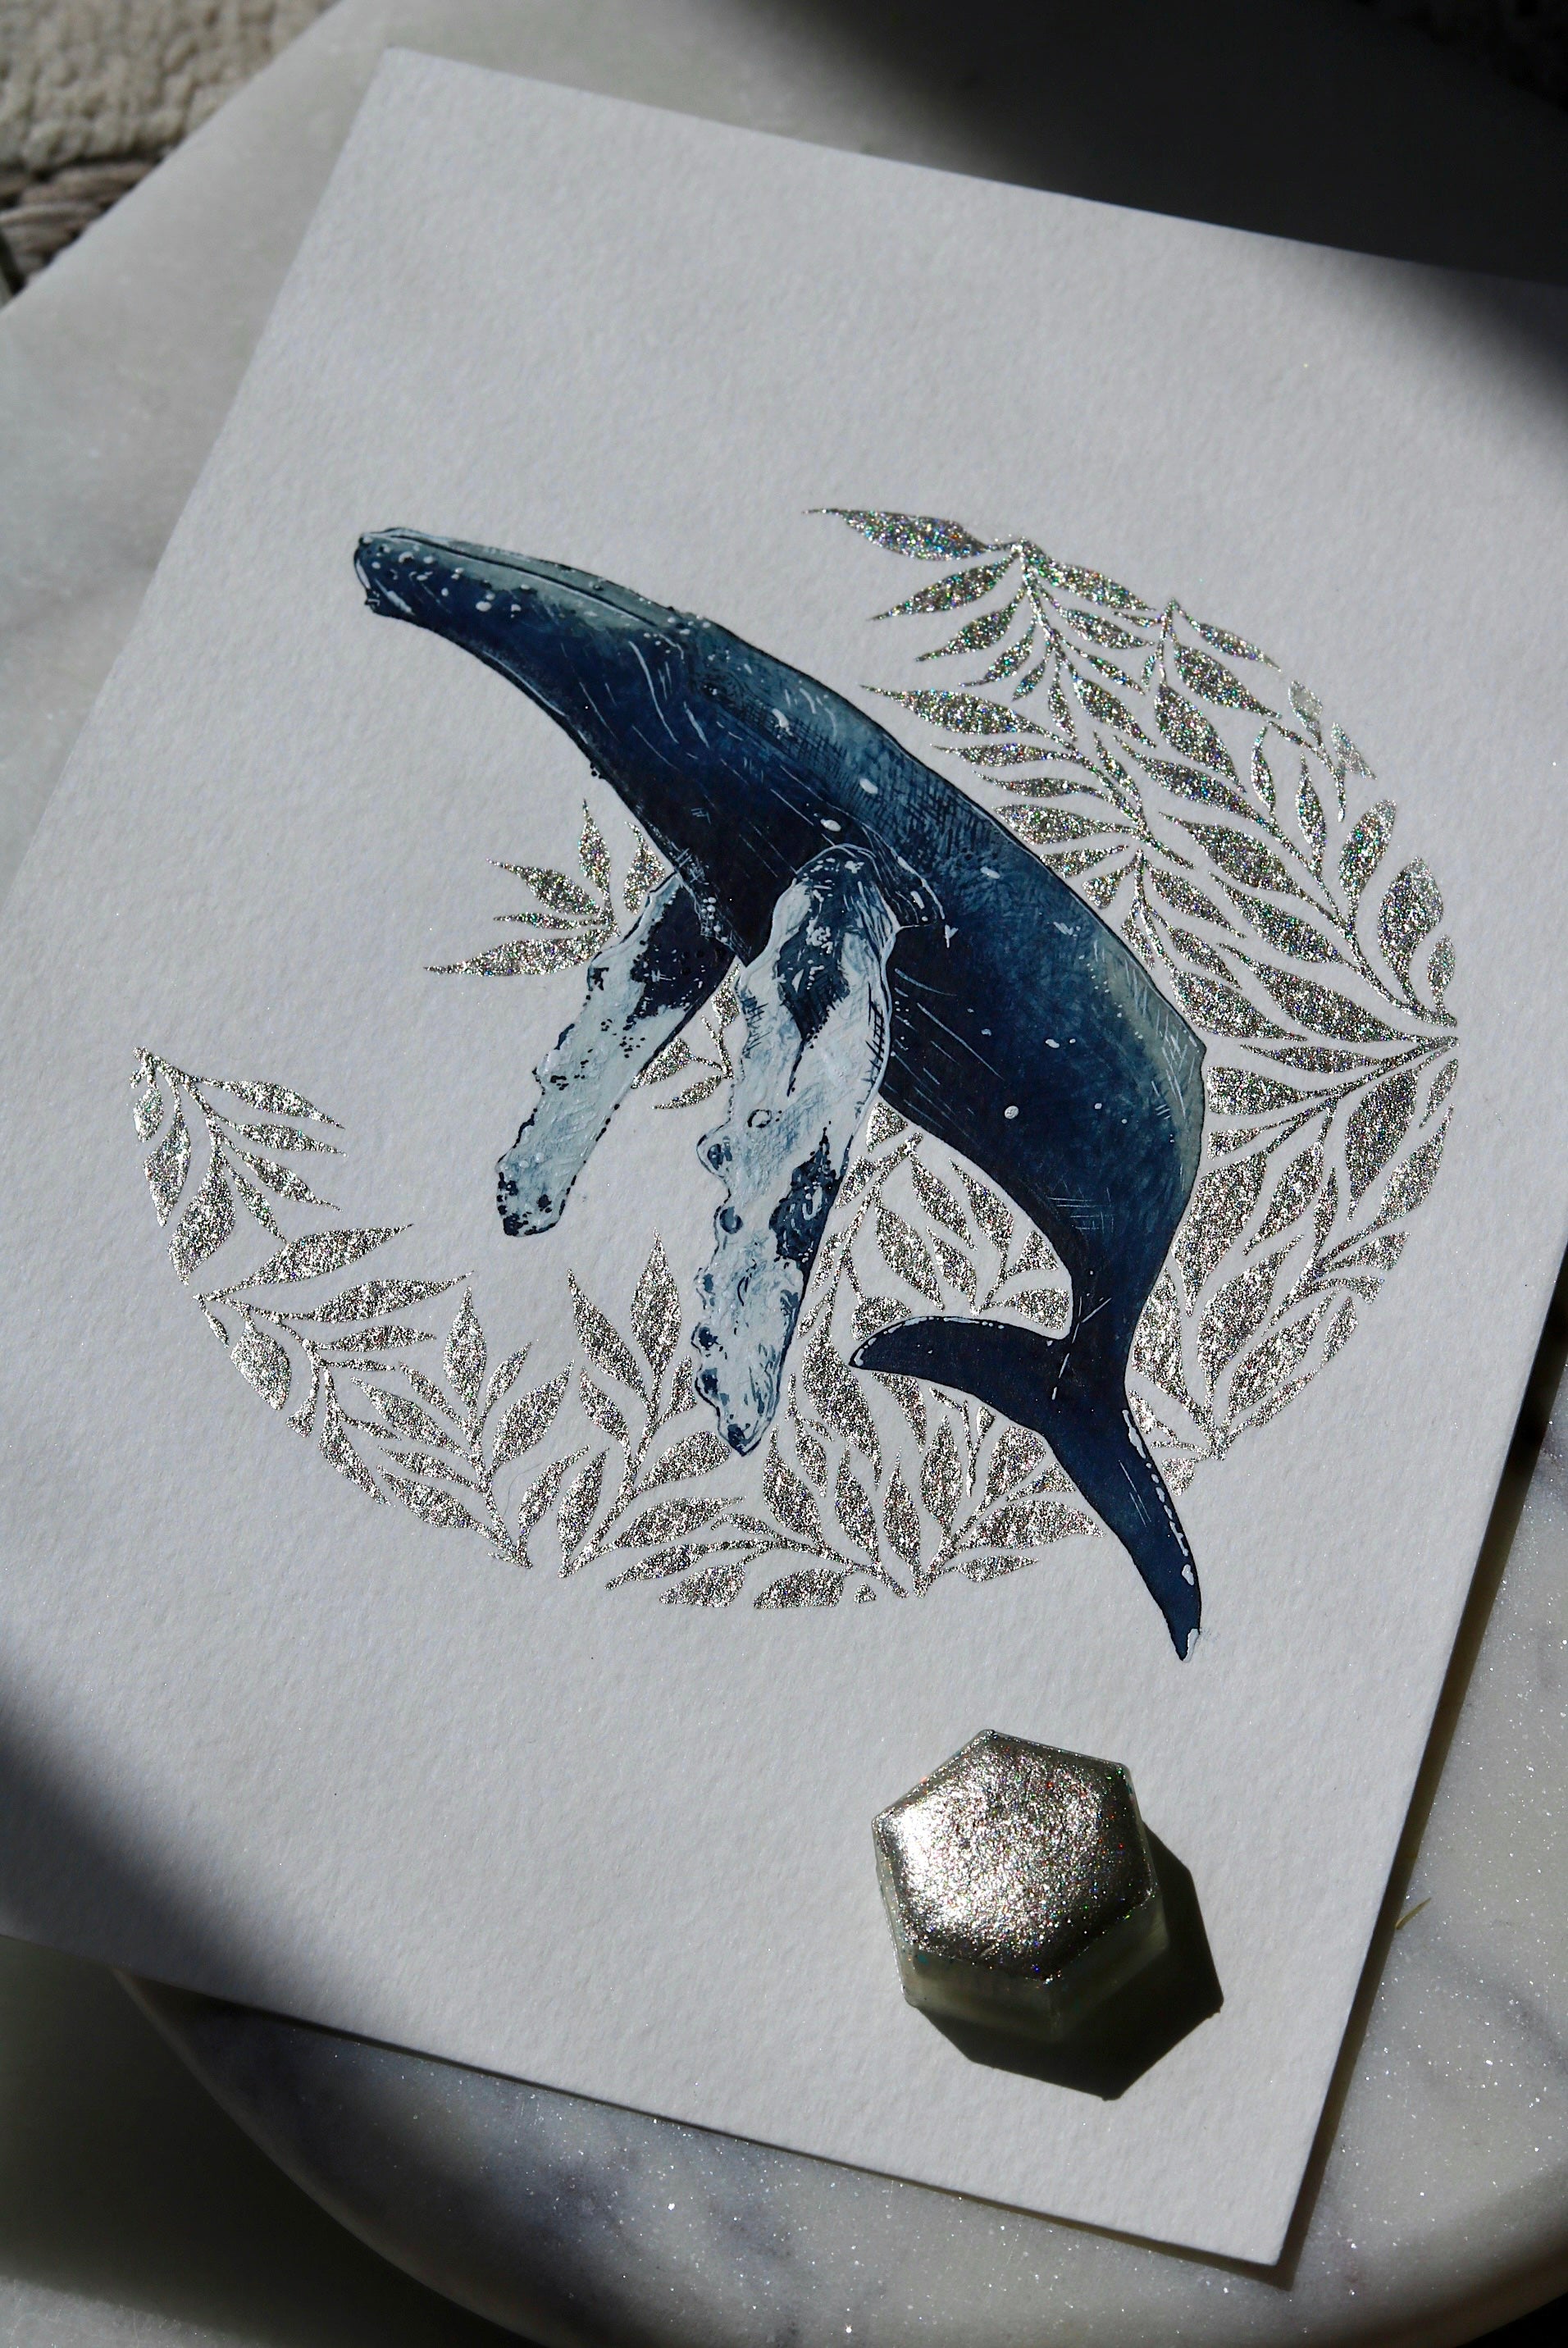 Sparkling Fish with Lisilinka Watercolors! Isn't this little guy